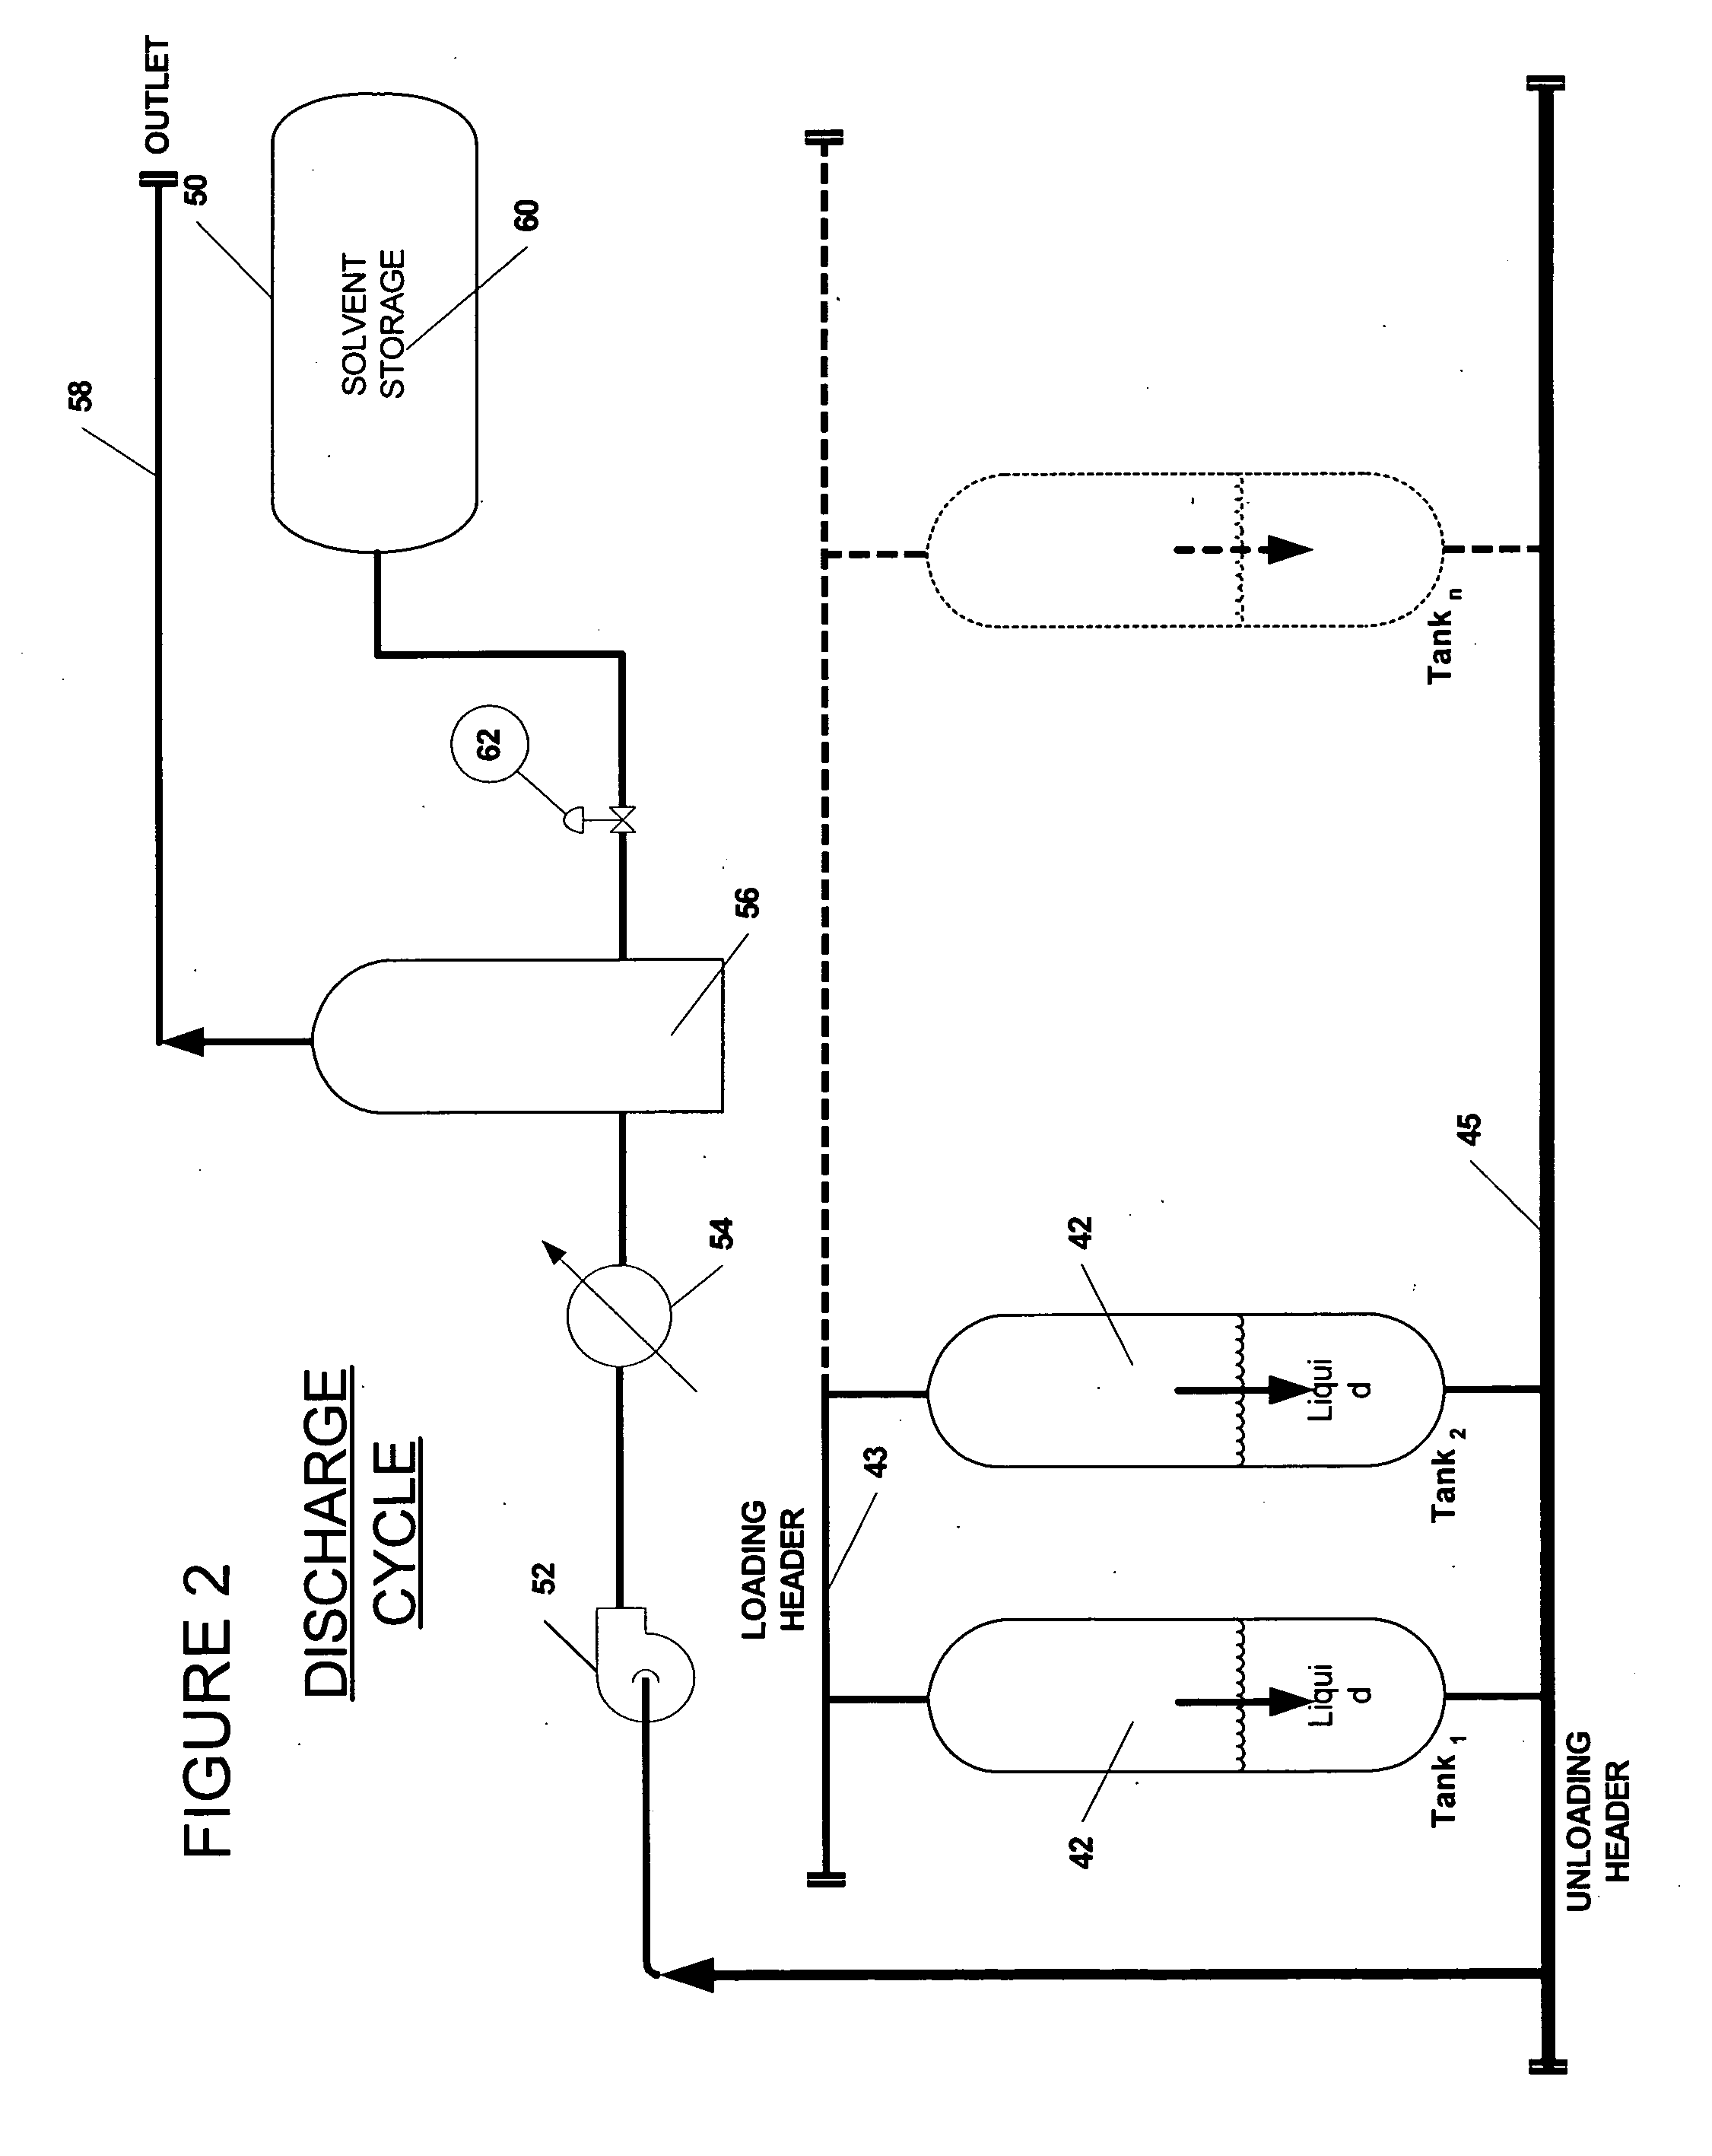 Storage of natural gas in liquid solvents and methods to absorb and segregate natural gas into and out of liquid solvents